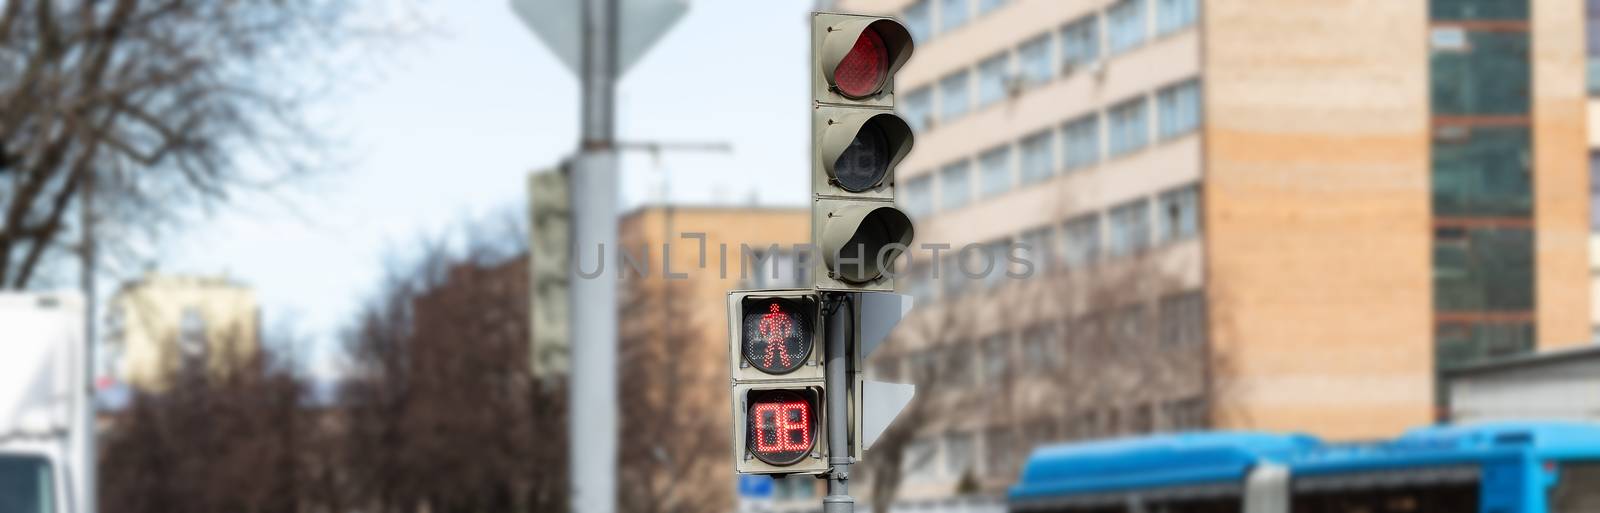 The traffic light shows red, which prohibits traffic for people. by bonilook